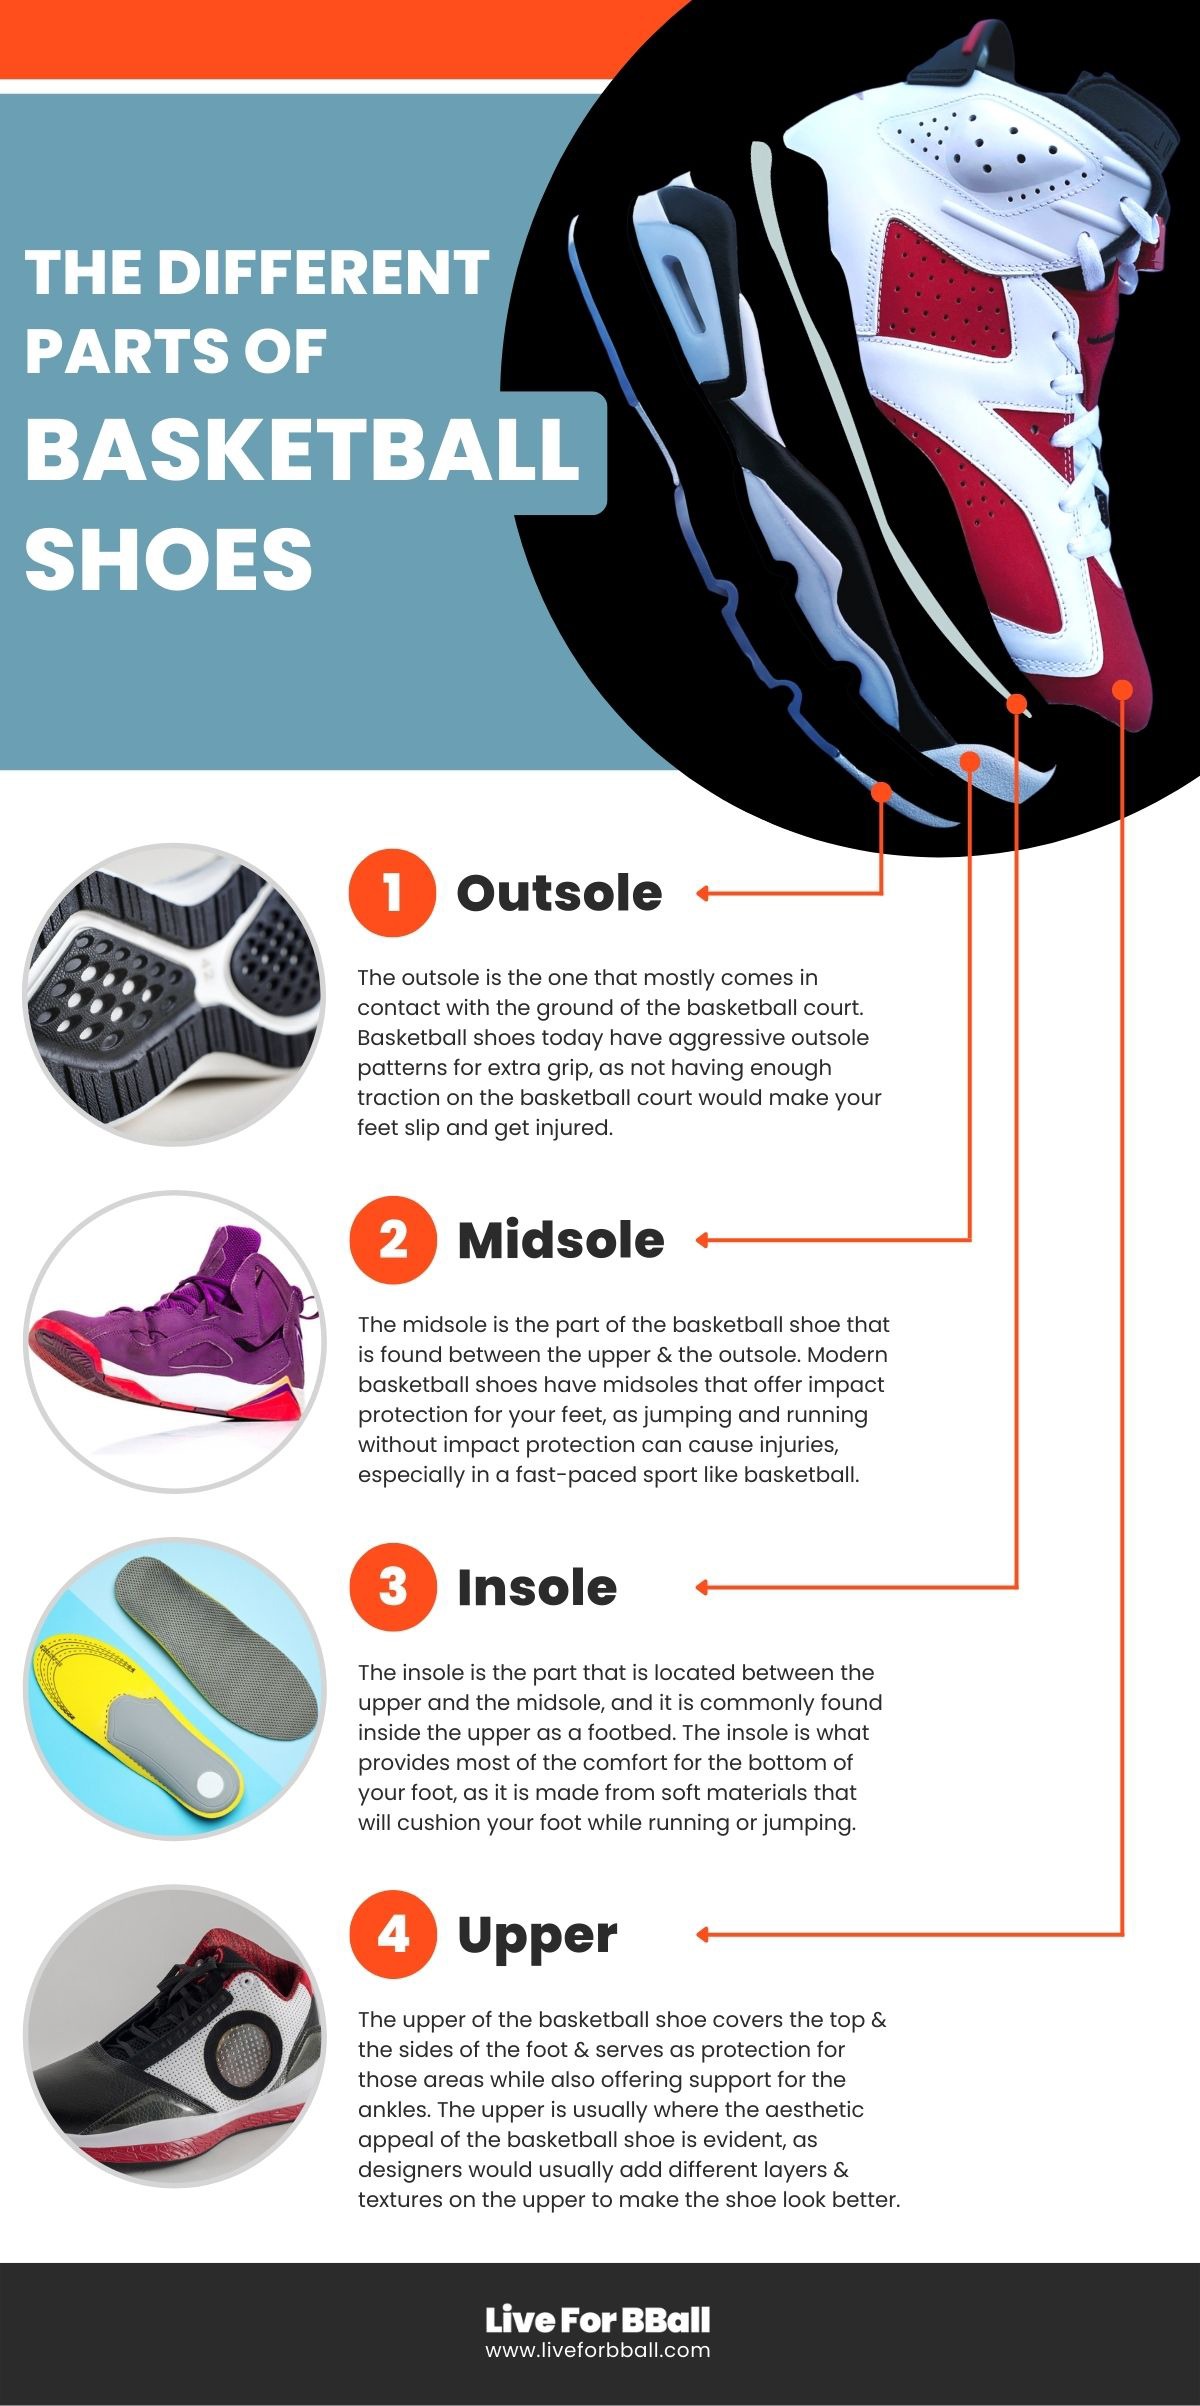 The Different Parts of Basketball Shoes